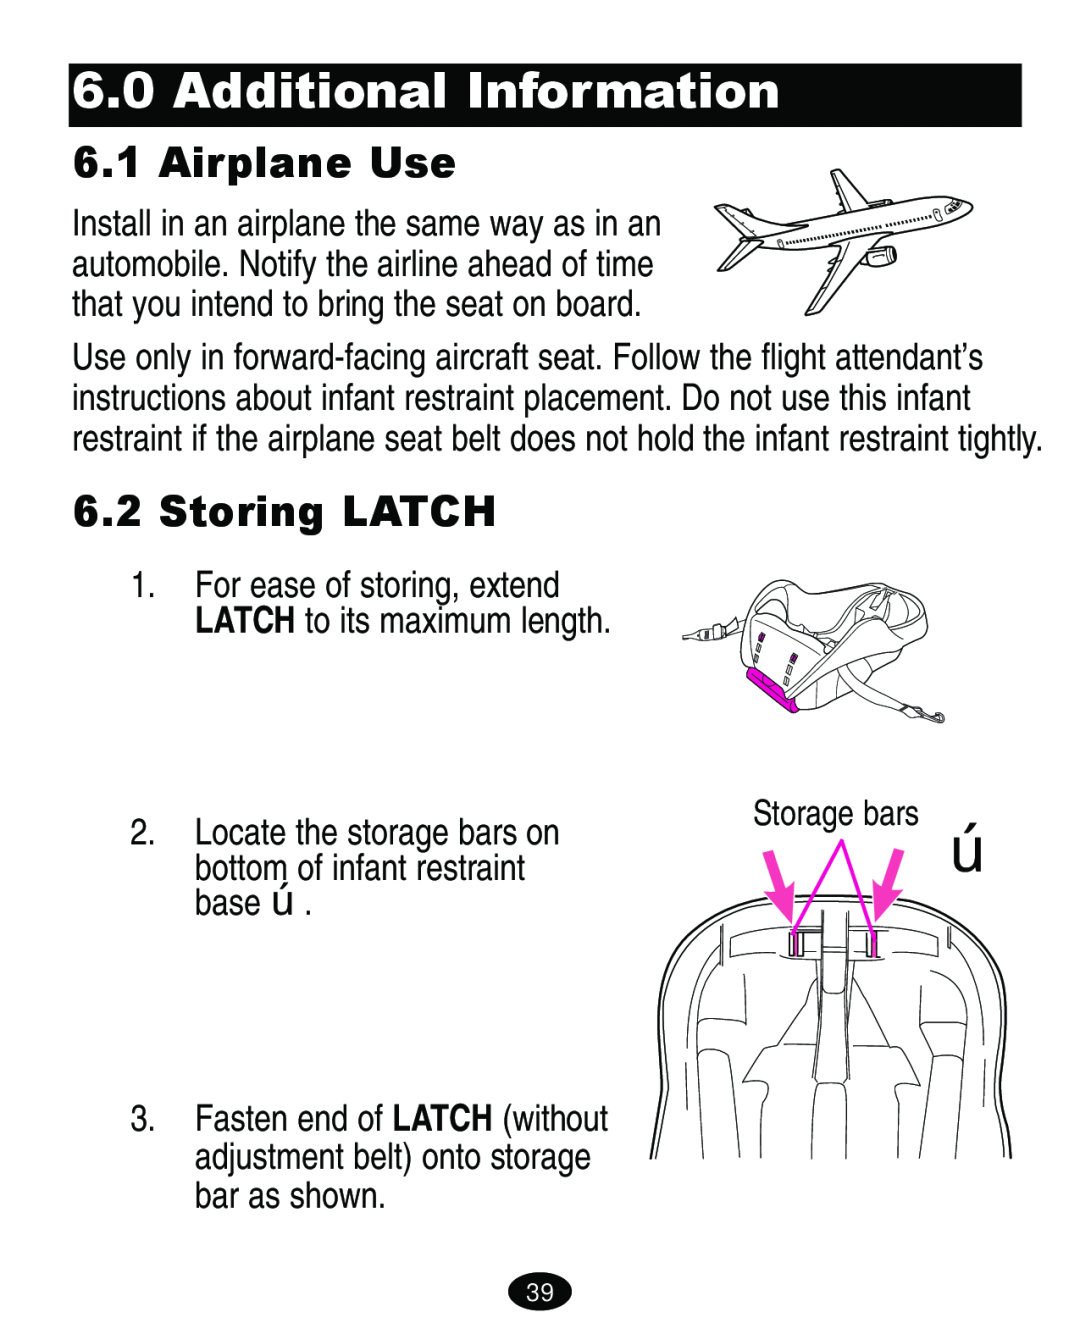 Graco 4460402 manual Additional Information, Airplane Use, Storing LATCH 